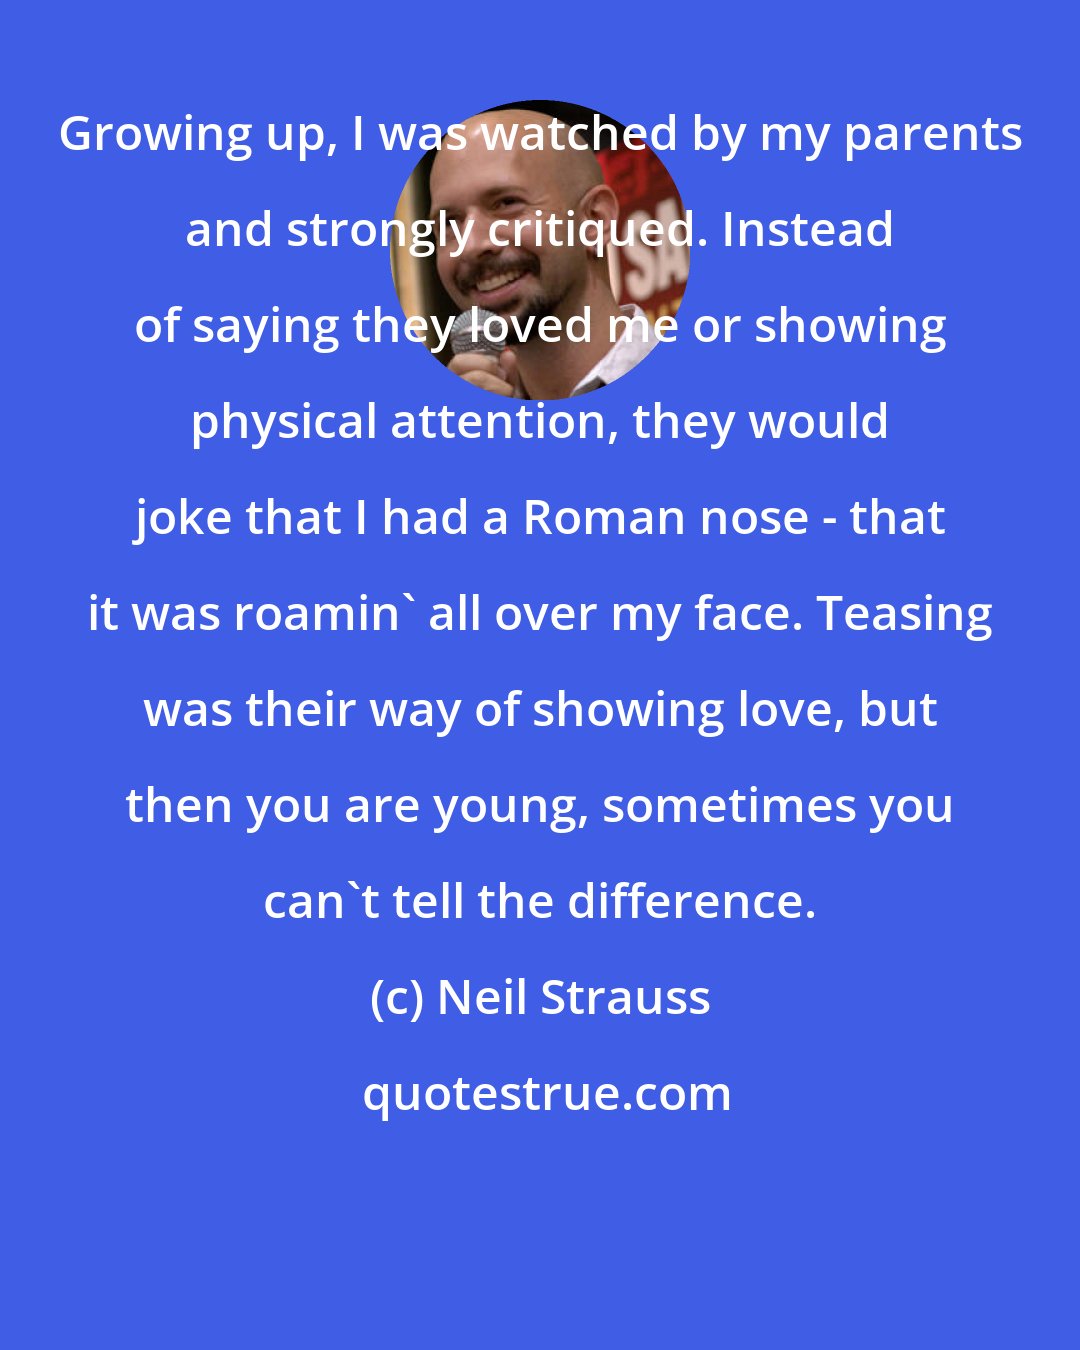 Neil Strauss: Growing up, I was watched by my parents and strongly critiqued. Instead of saying they loved me or showing physical attention, they would joke that I had a Roman nose - that it was roamin' all over my face. Teasing was their way of showing love, but then you are young, sometimes you can't tell the difference.